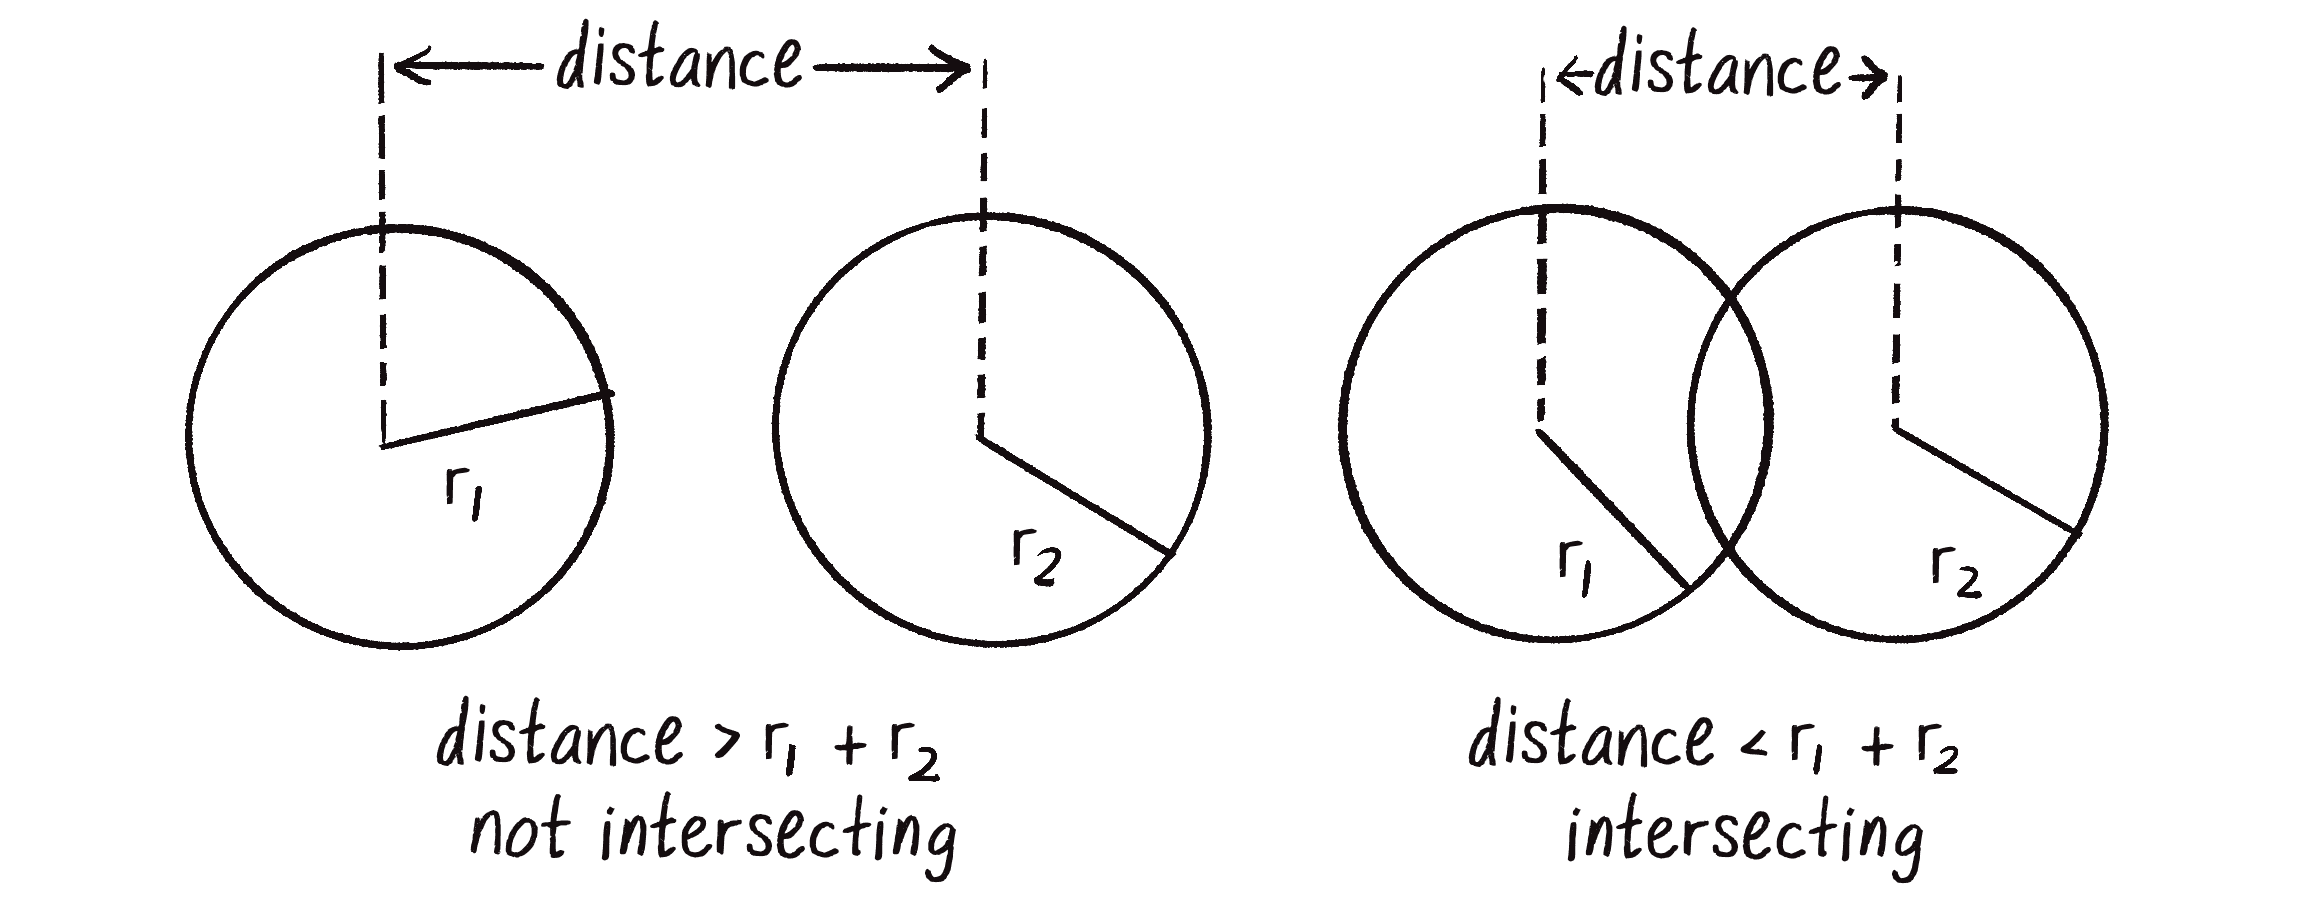 Figure 6.1: Two circles with radii r_1 and r_2 are colliding if the distance between them is less than r_1 + r_2.